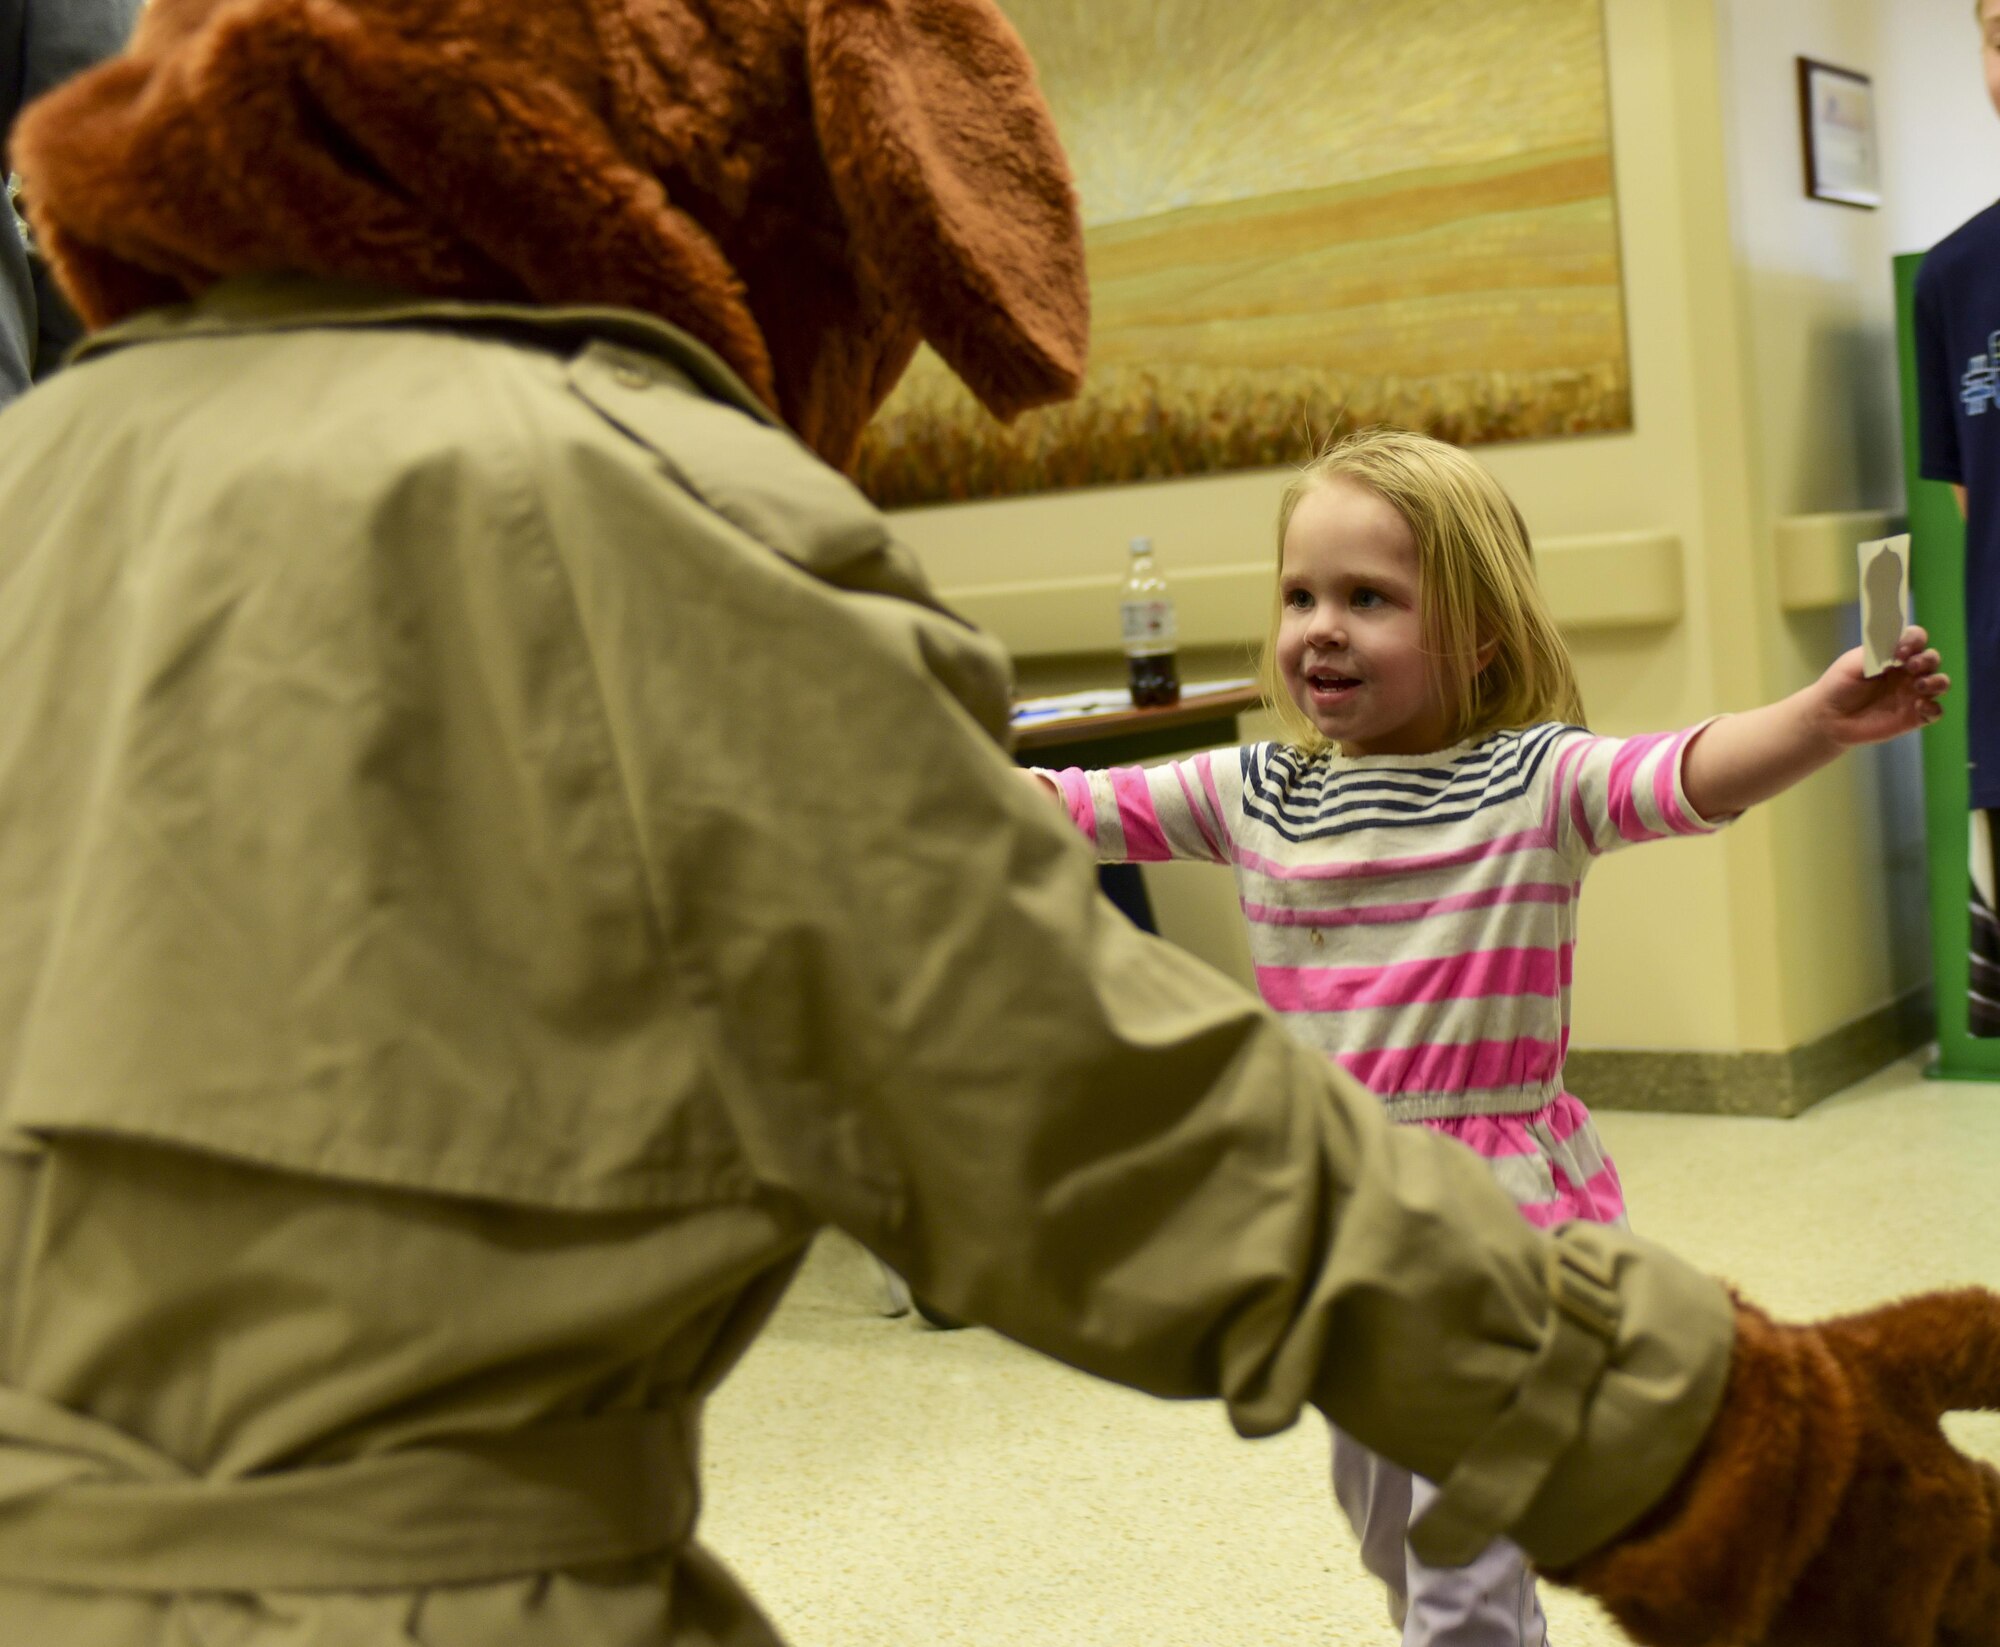 Alexa Henriksen runs to give McGruff the Crime Dog a hug during the 2017 Children’s Fair inside the 28th Medical Group at Ellsworth Air Force Base, S.D., April 20, 2017. McGruff the Crime Dog and Sparky the Fire Dog participated in the Children’s Fair to raise awareness for Child Abuse Prevention Awareness Month. (U.S. Air Force photo by Airman 1st Class Randahl J. Jenson)  